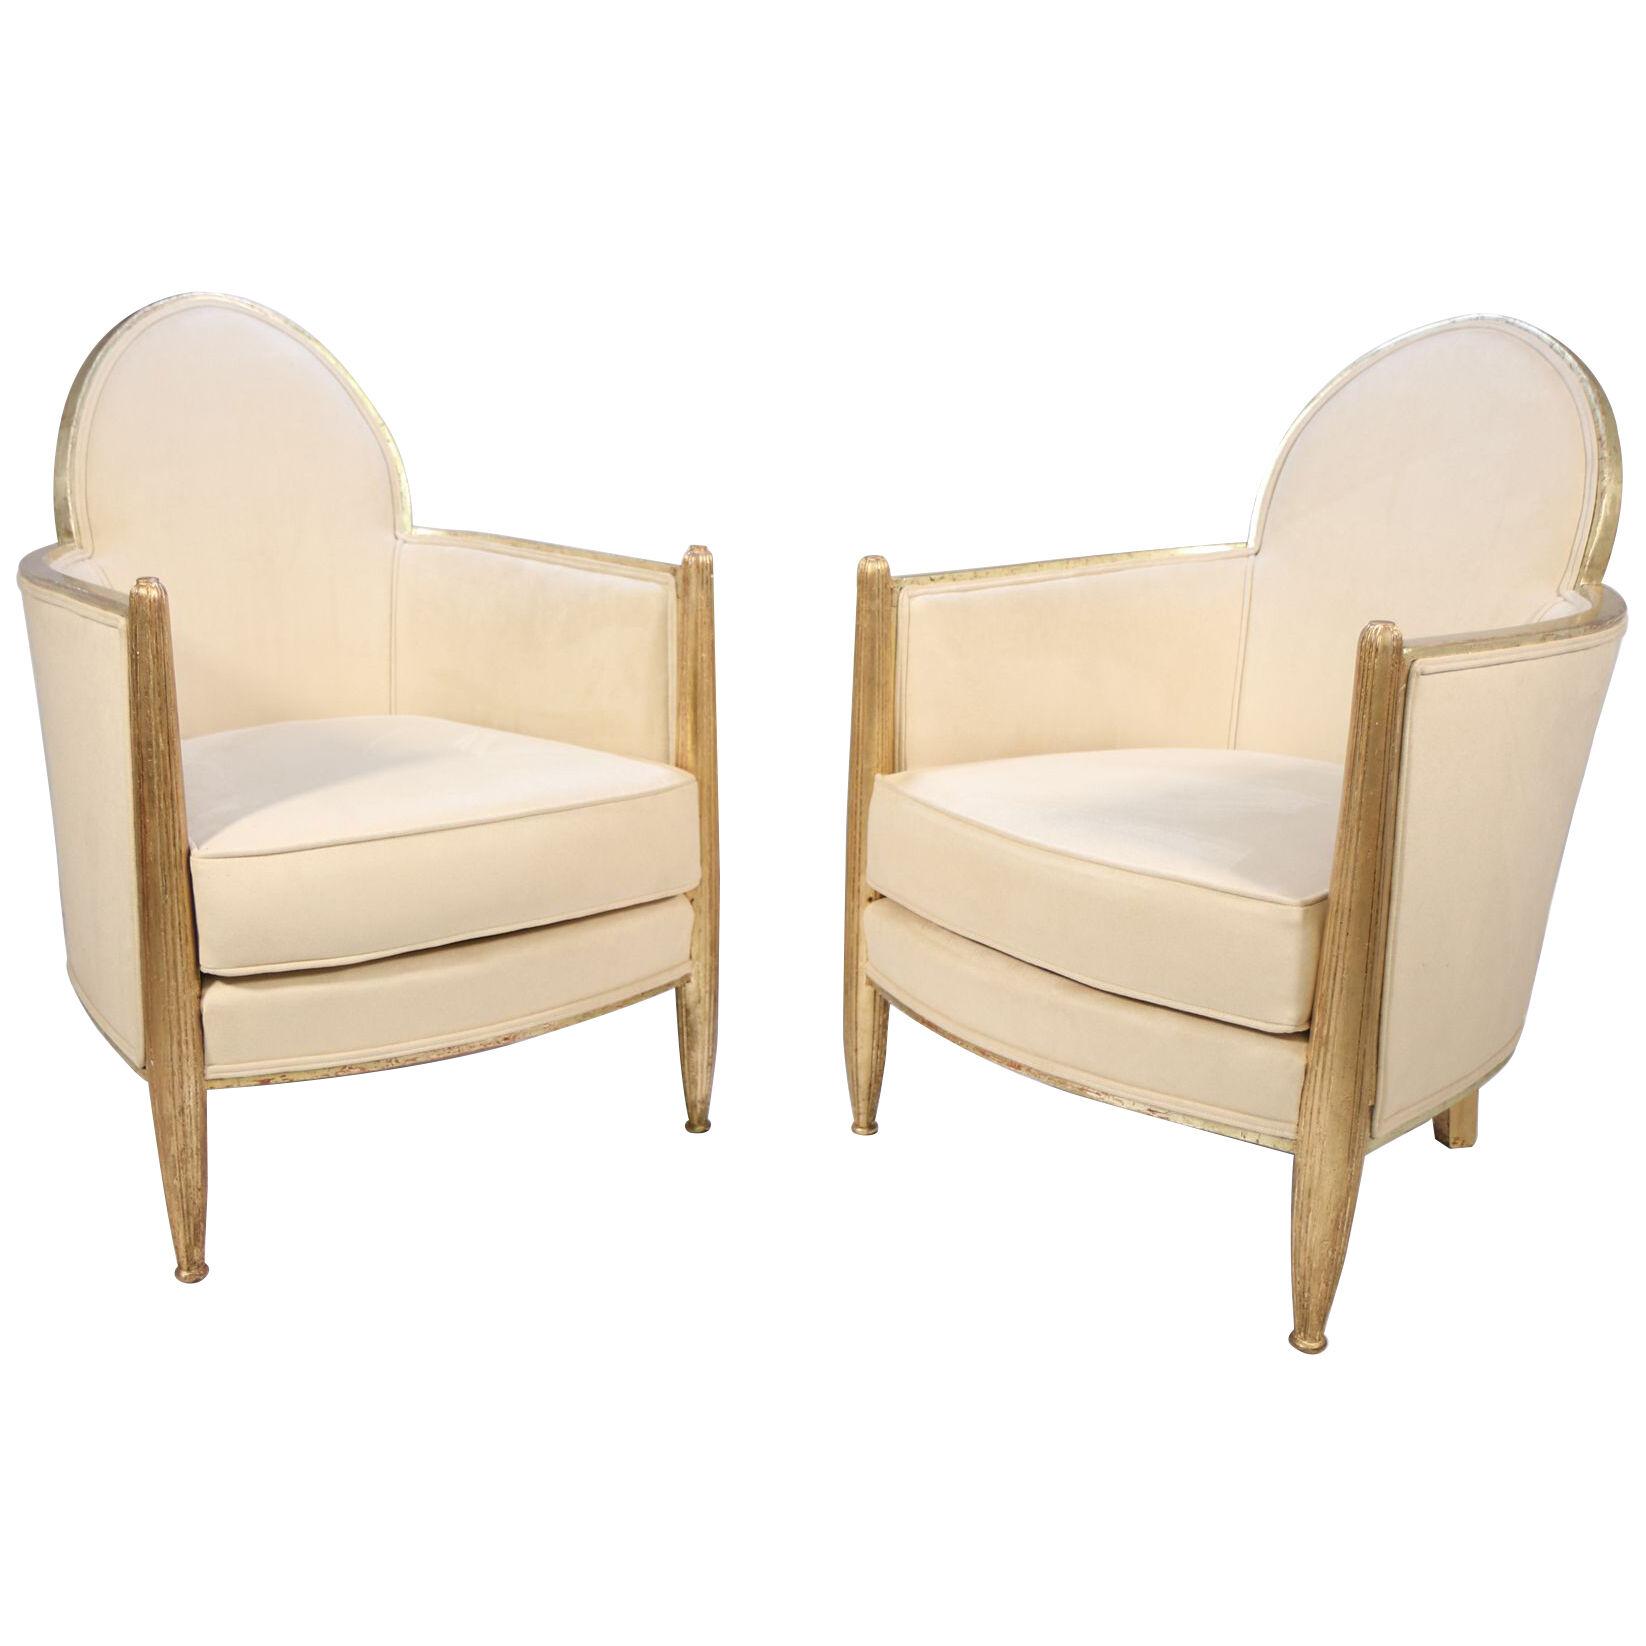 Pair of French Art Deco Armchairs in Parcel Gilt wood